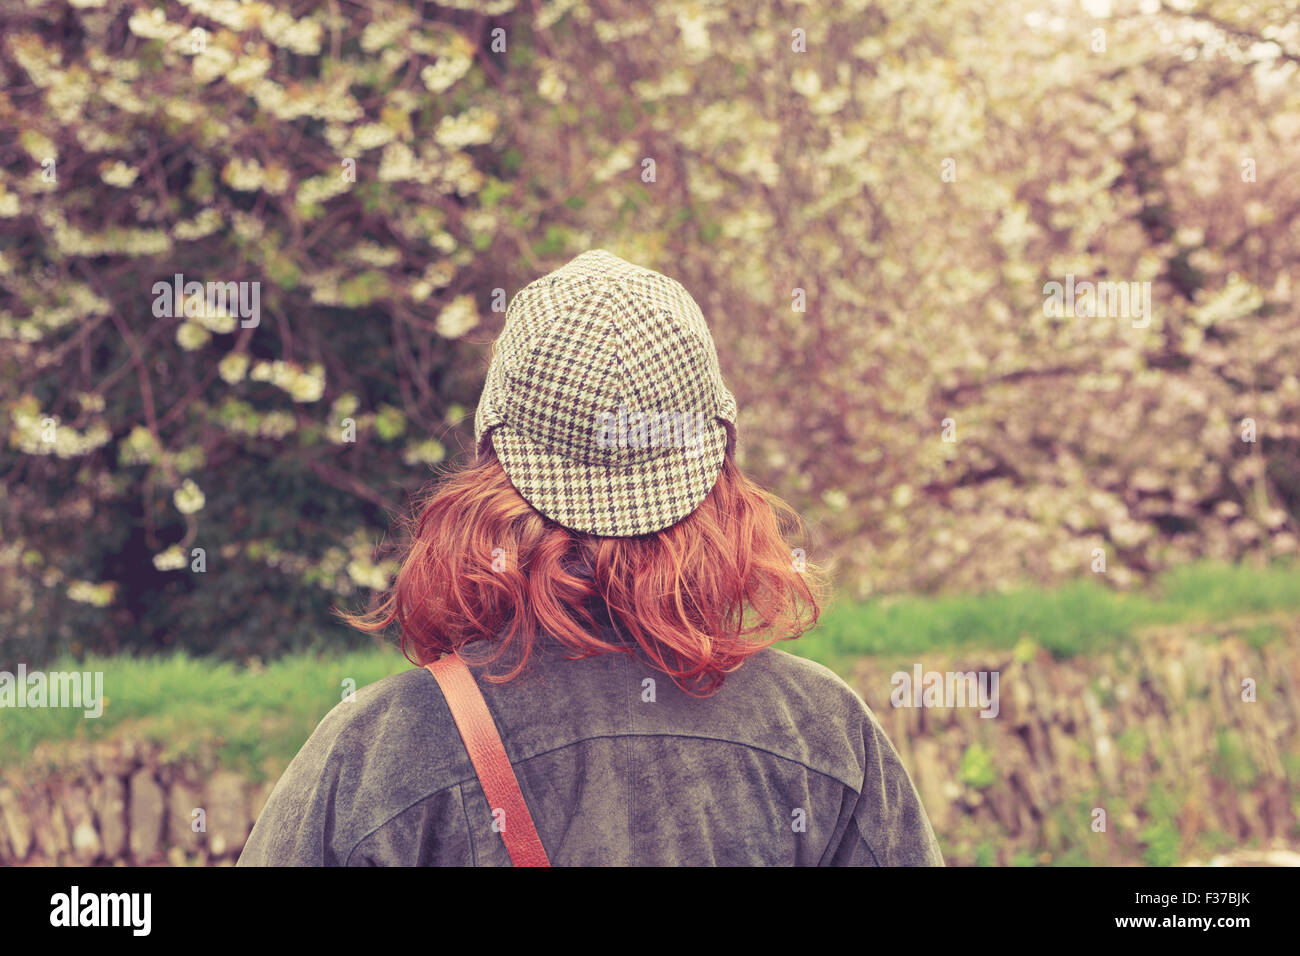 Rear view of young woman in deerstalker hat looking at trees Stock Photo